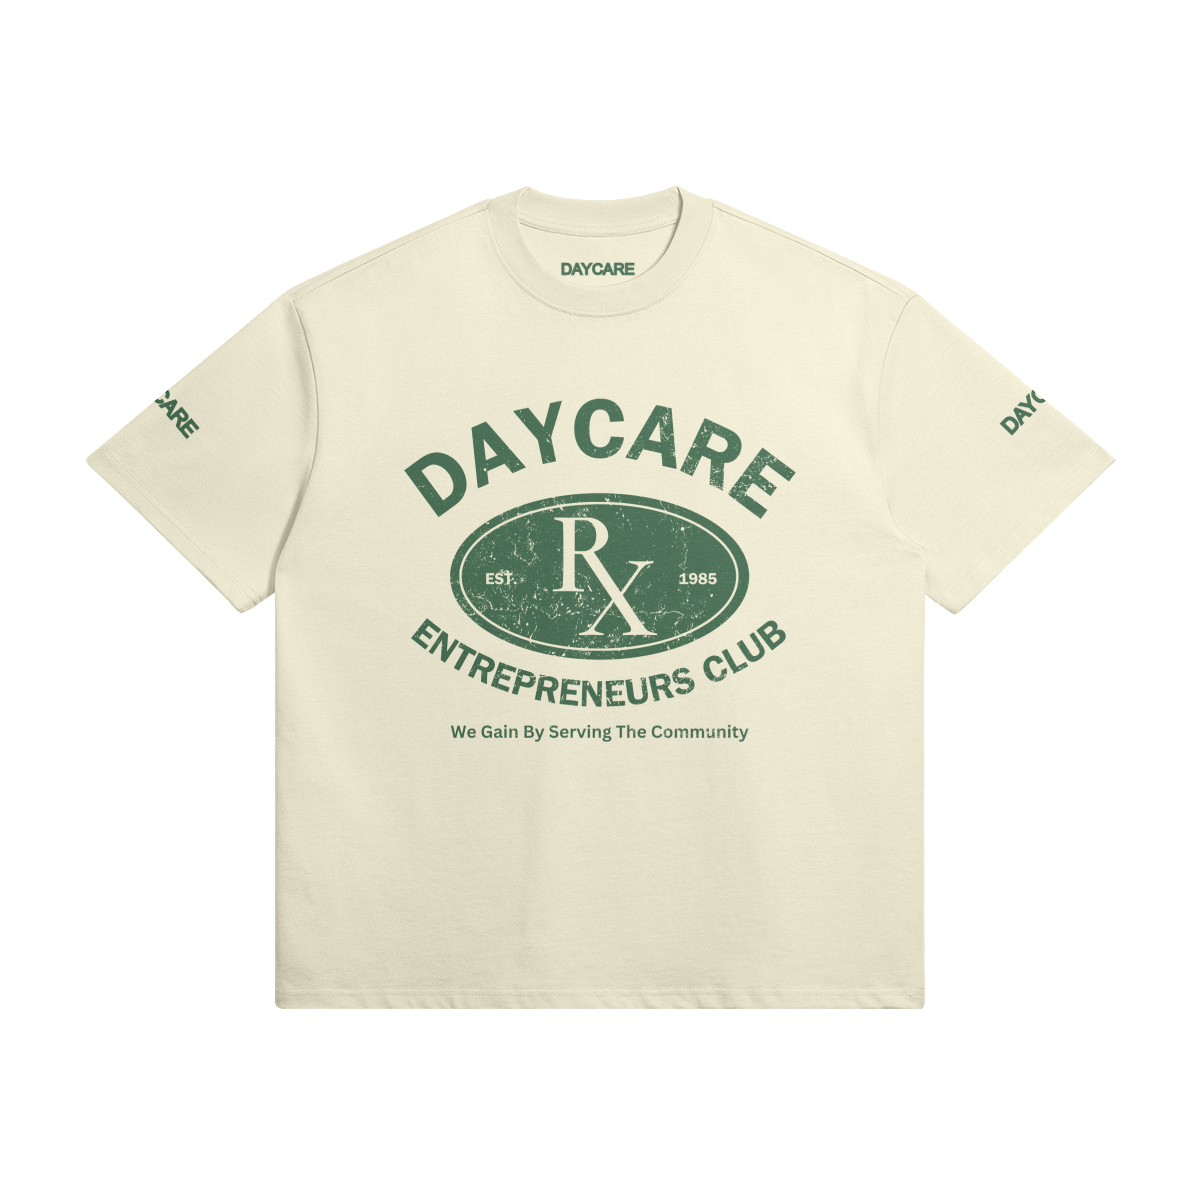 DAYCARE RX T-SHIRT